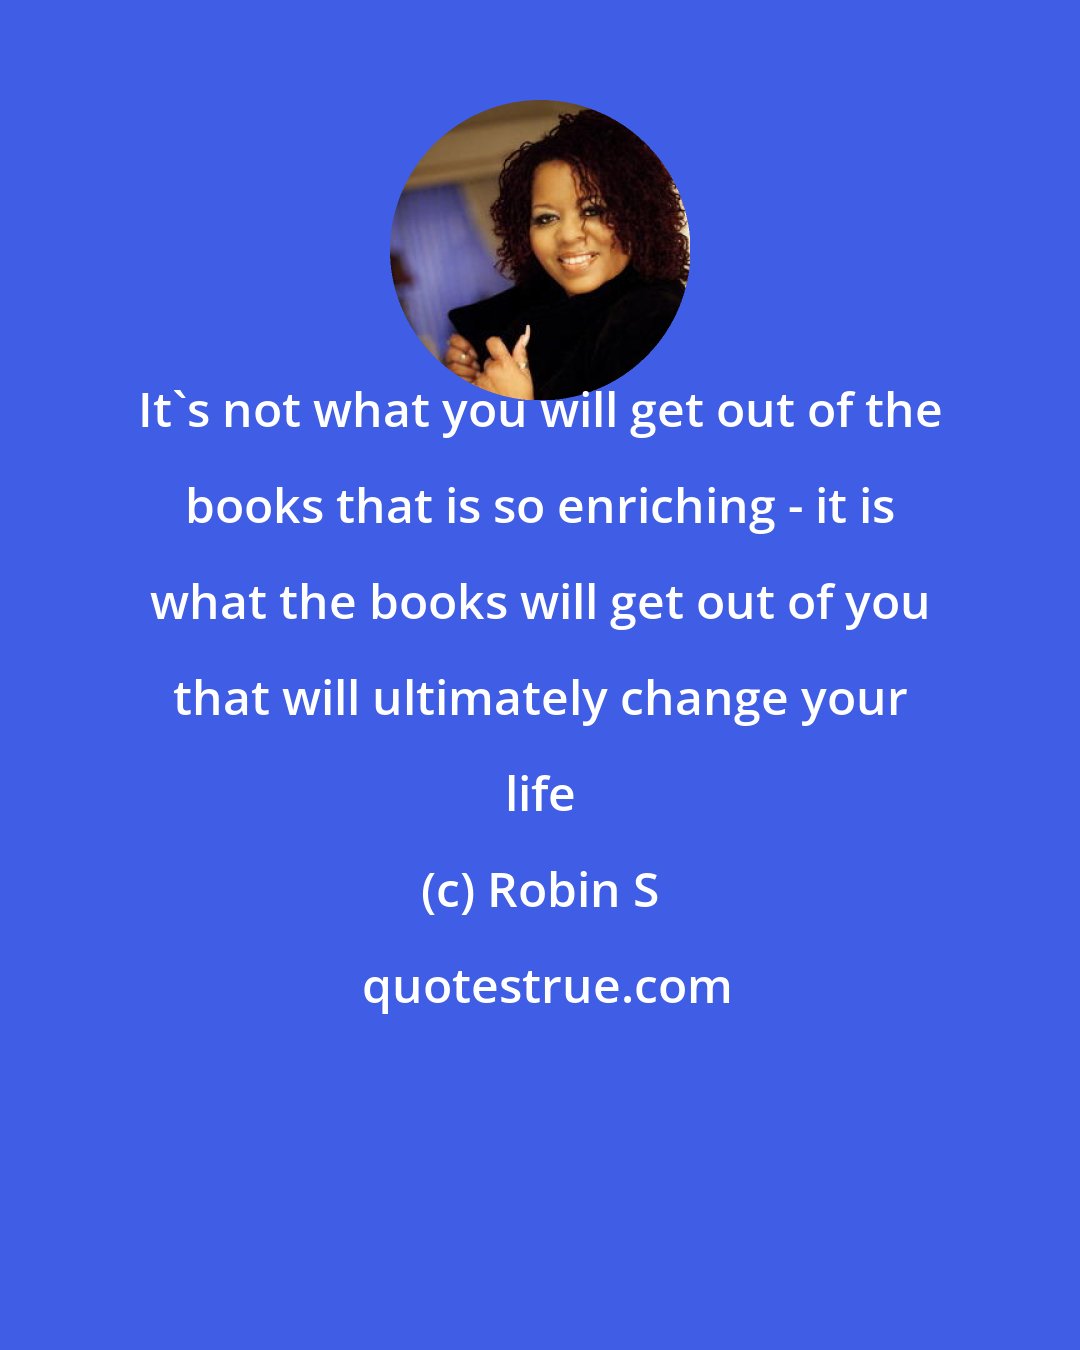 Robin S: It's not what you will get out of the books that is so enriching - it is what the books will get out of you that will ultimately change your life